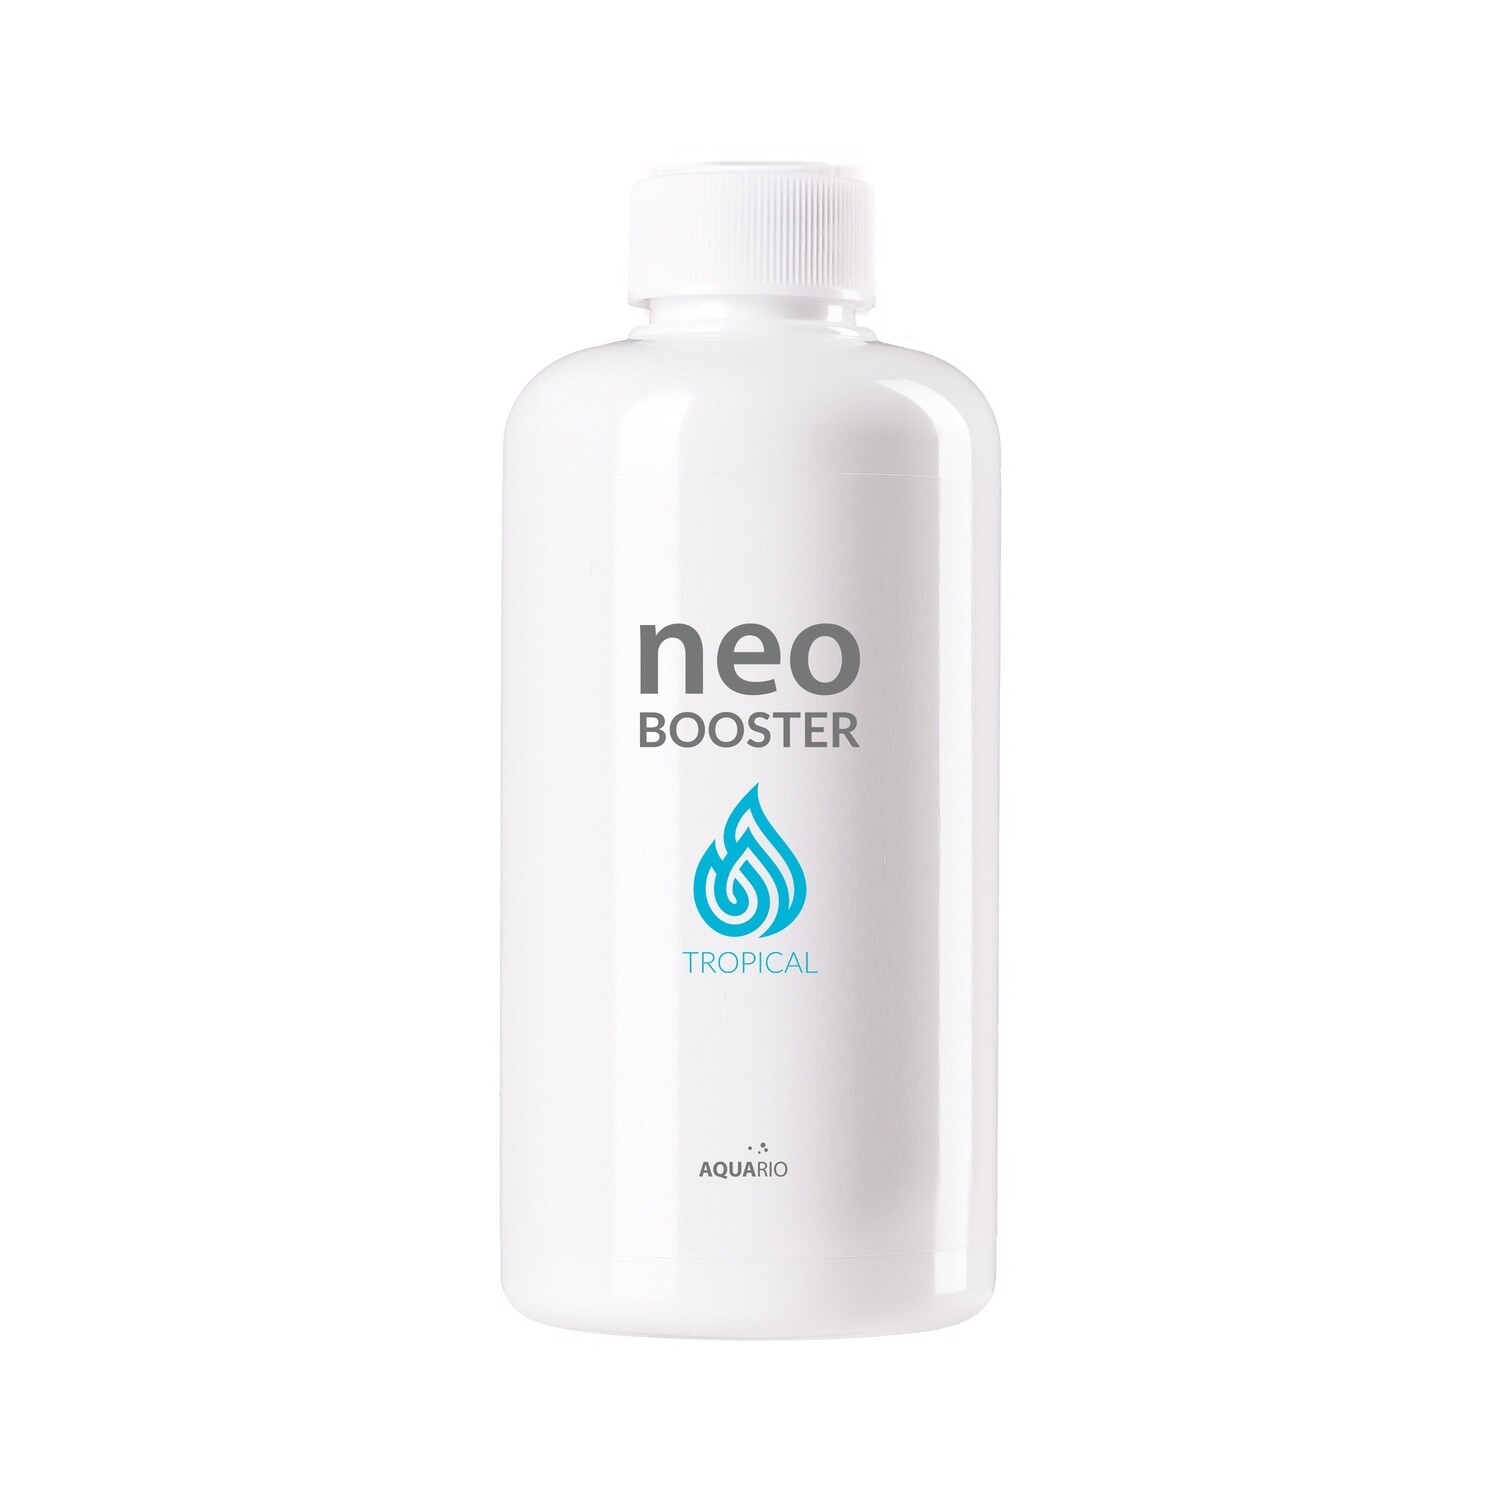 Neo Booster Tropical, volume: Neo Booster Tropical 300ml